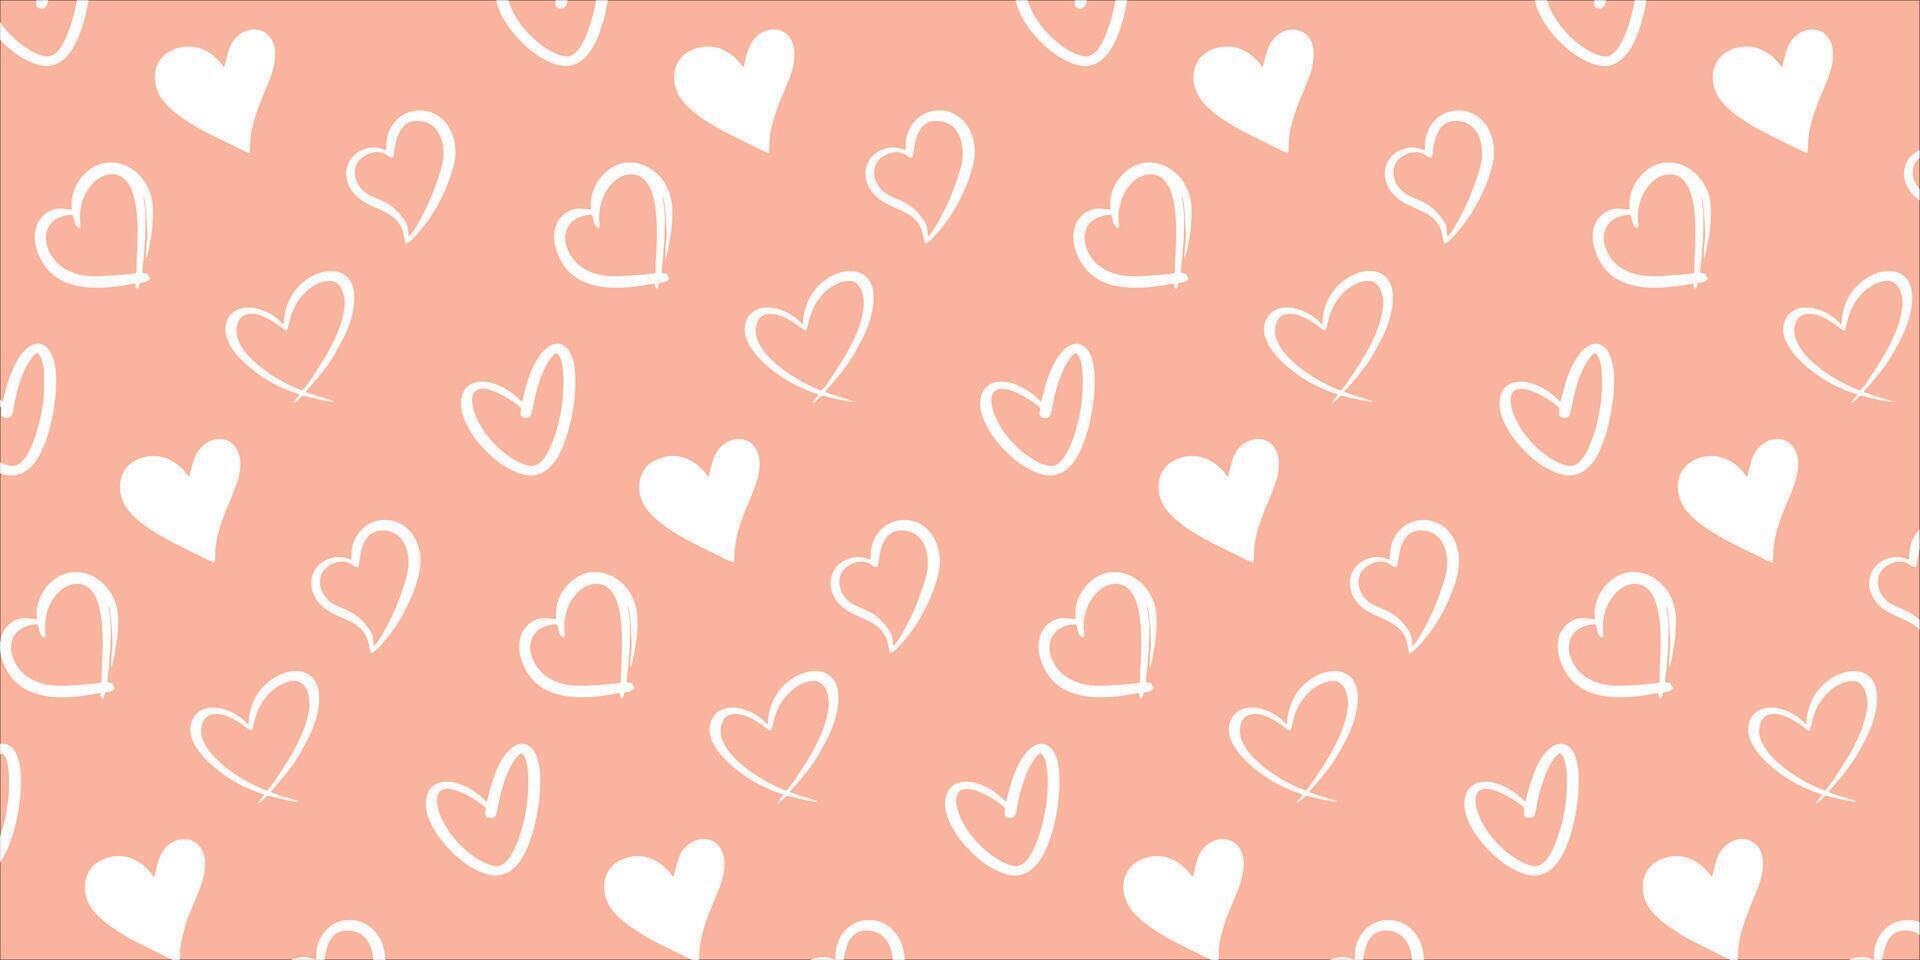 Cute love heart seamless pattern illustration. Cute romantic pink hearts background print. Valentine's day holiday, romantic wedding design. vector